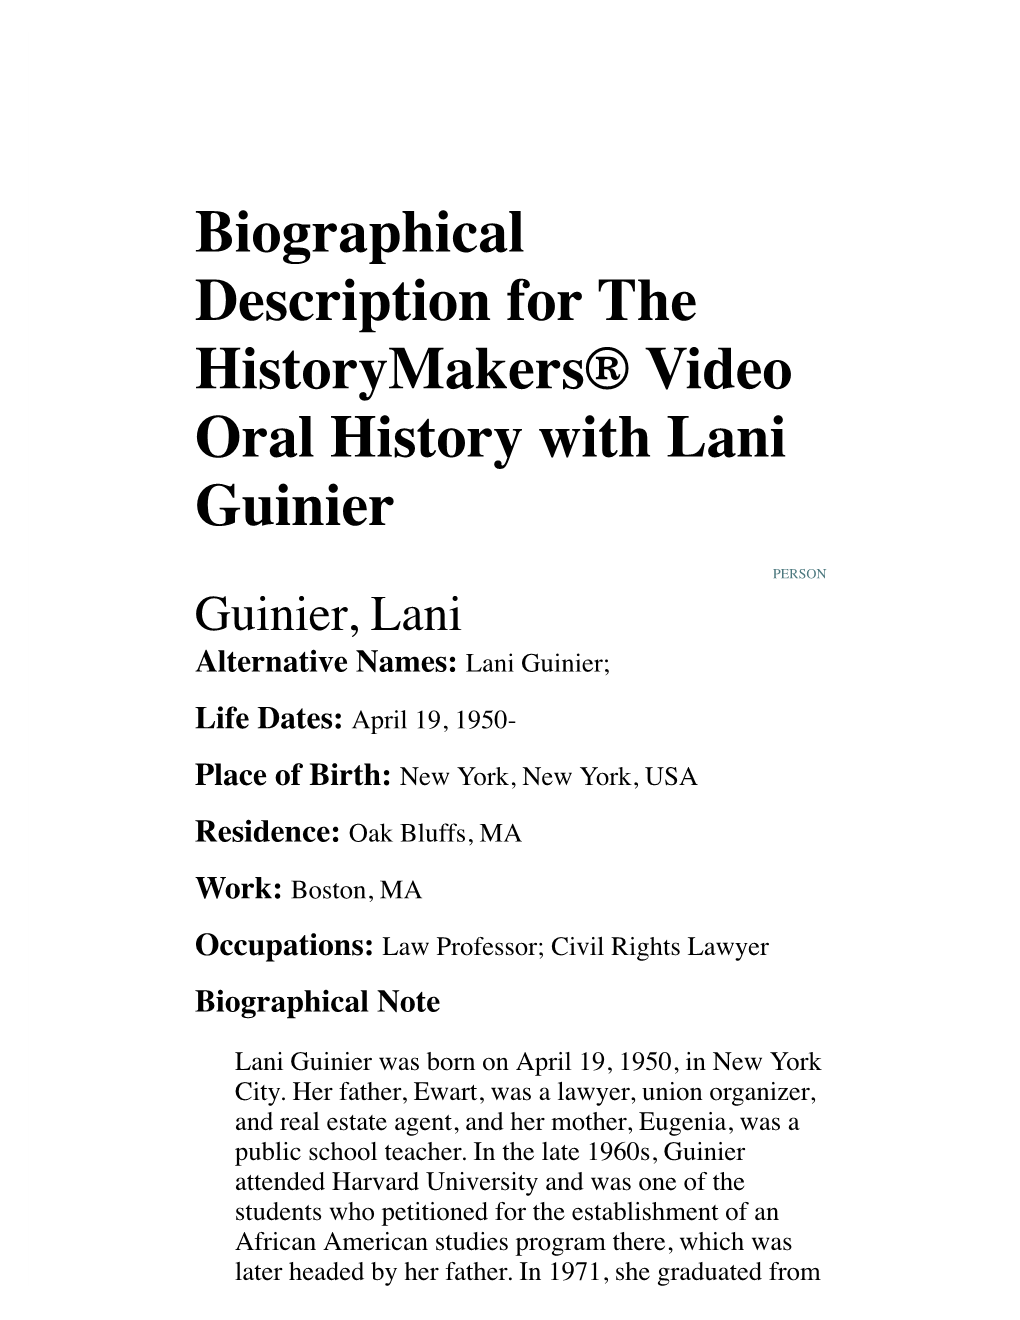 Biographical Description for the Historymakers® Video Oral History with Lani Guinier